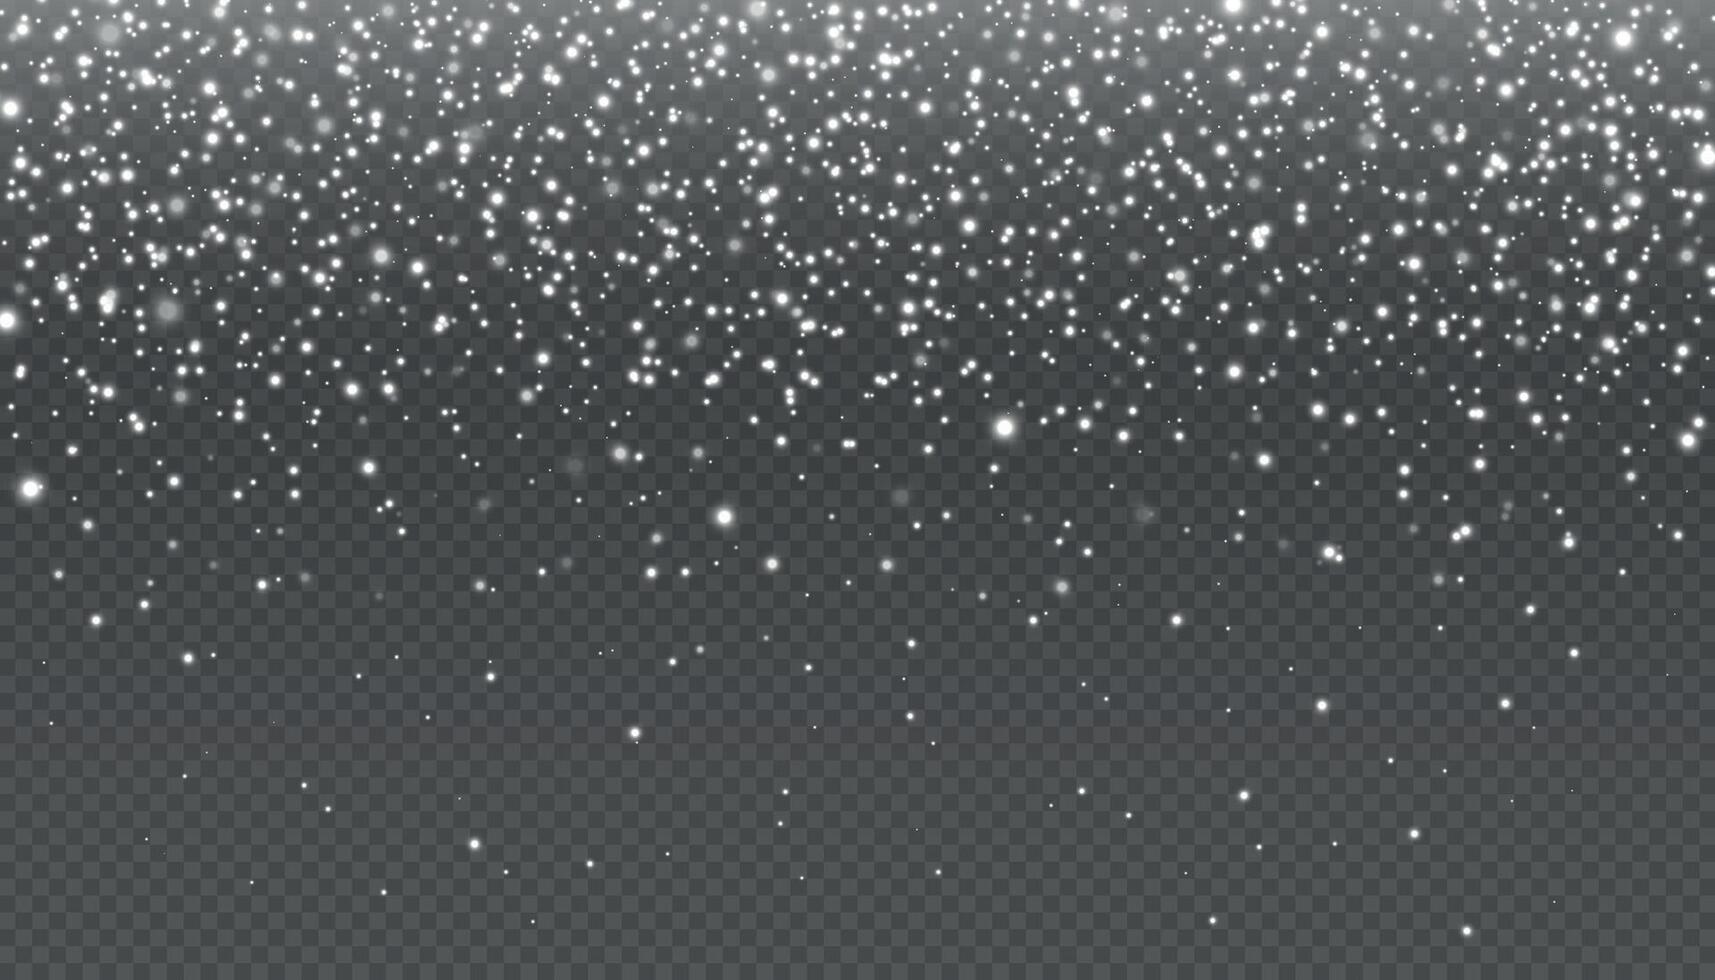 Realistic white winter snowfall, merry christmas night background. Falling snow. Flying snowflakes. Snowy weather transparent vector effect